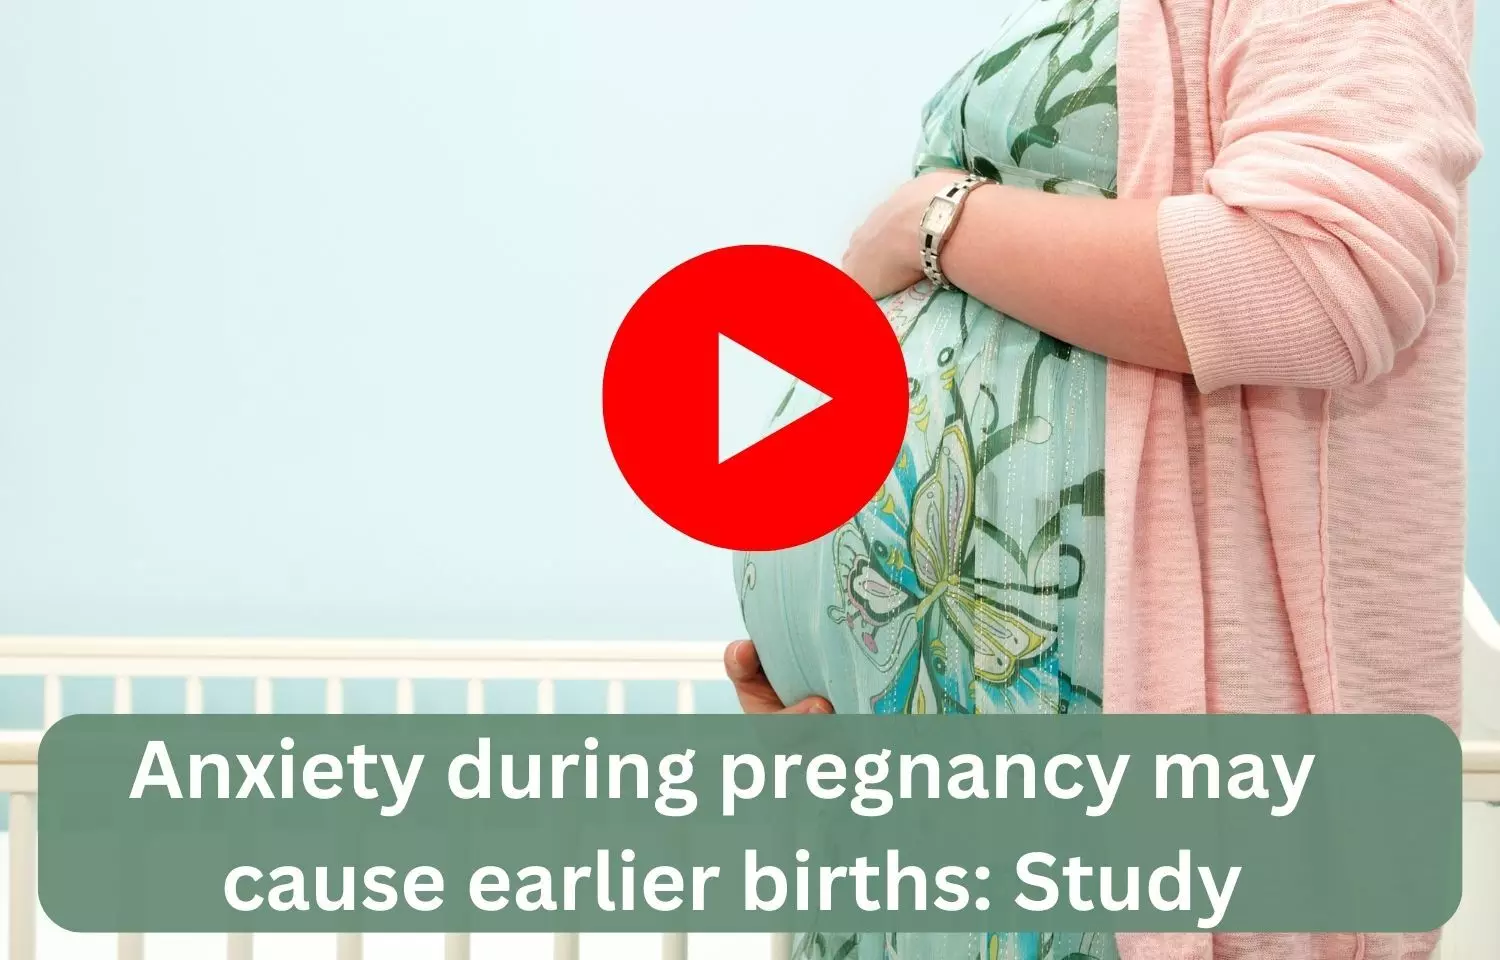 Anxiety during pregnancy may cause earlier births: Study